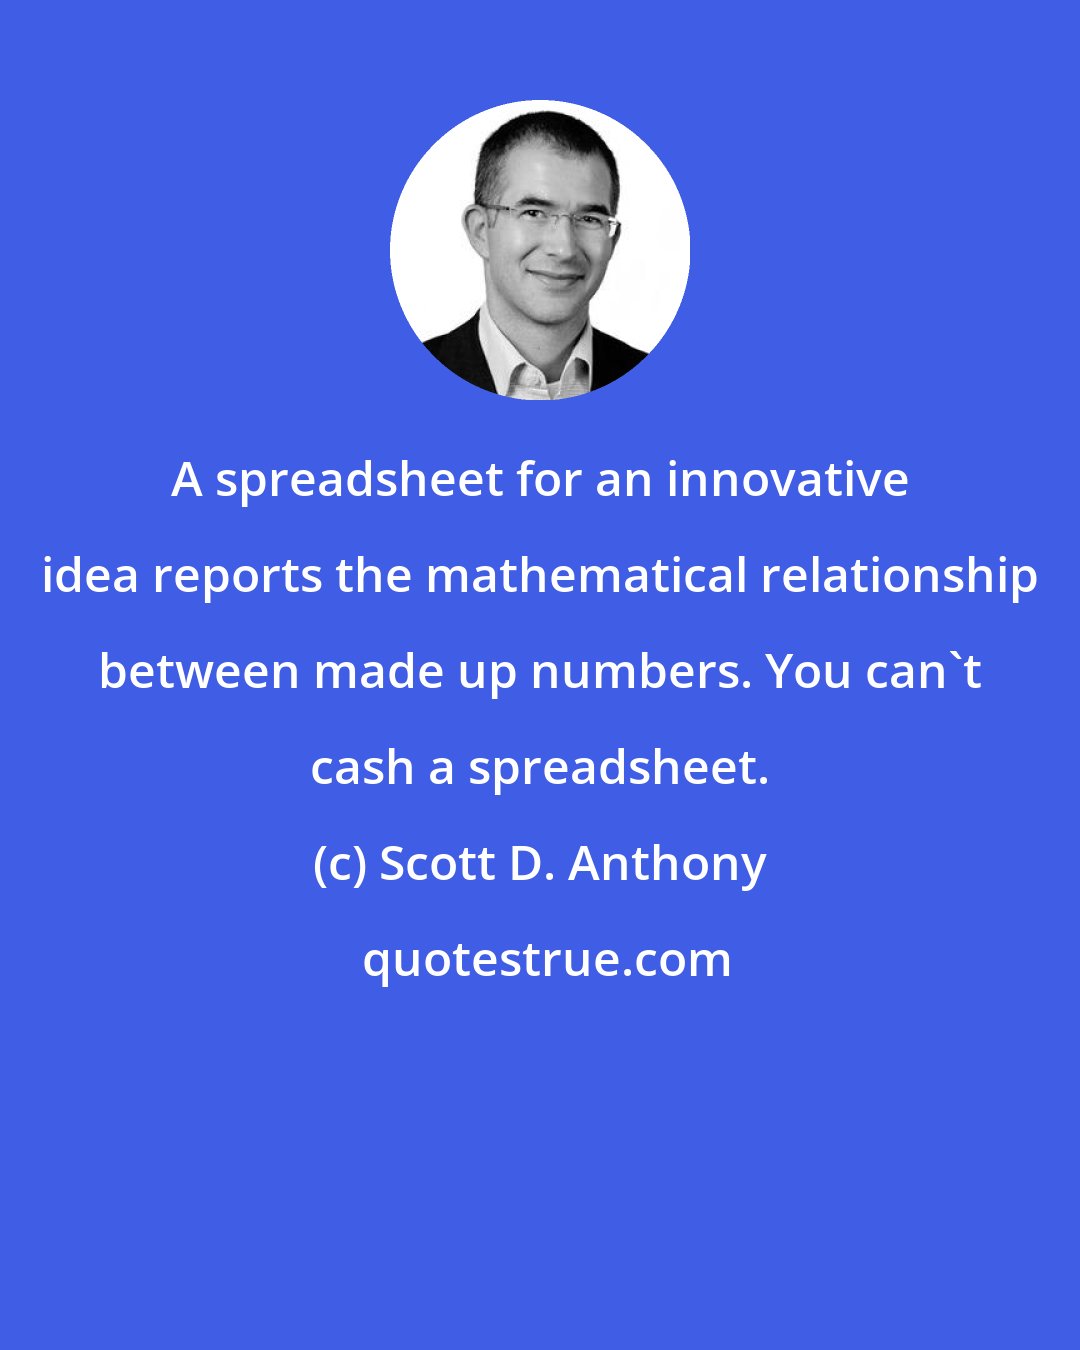 Scott D. Anthony: A spreadsheet for an innovative idea reports the mathematical relationship between made up numbers. You can't cash a spreadsheet.